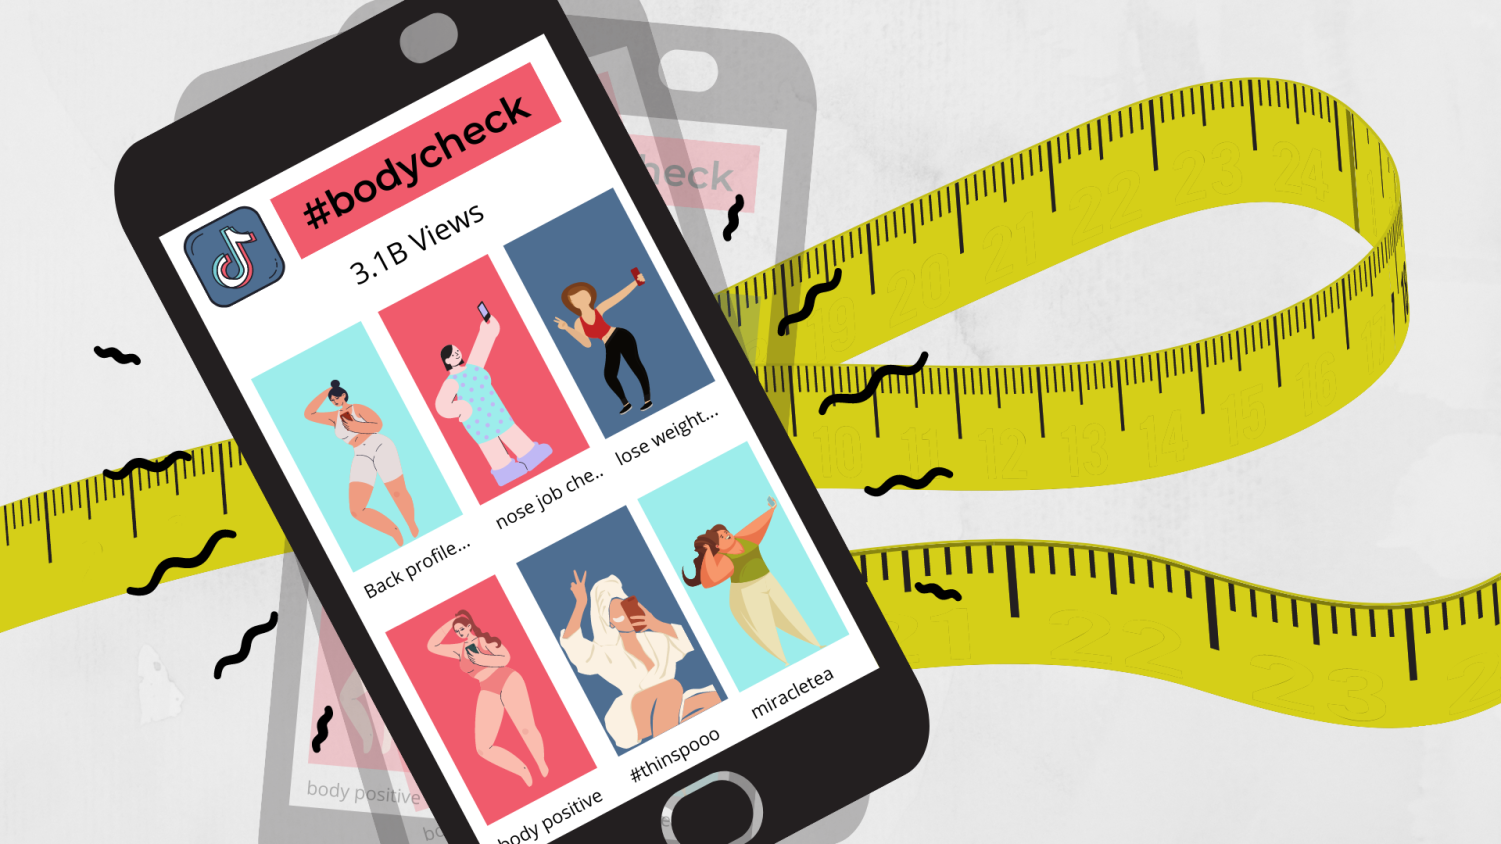 Toxic Body Image Ideals Timeline: History of Weight and Beauty Standards